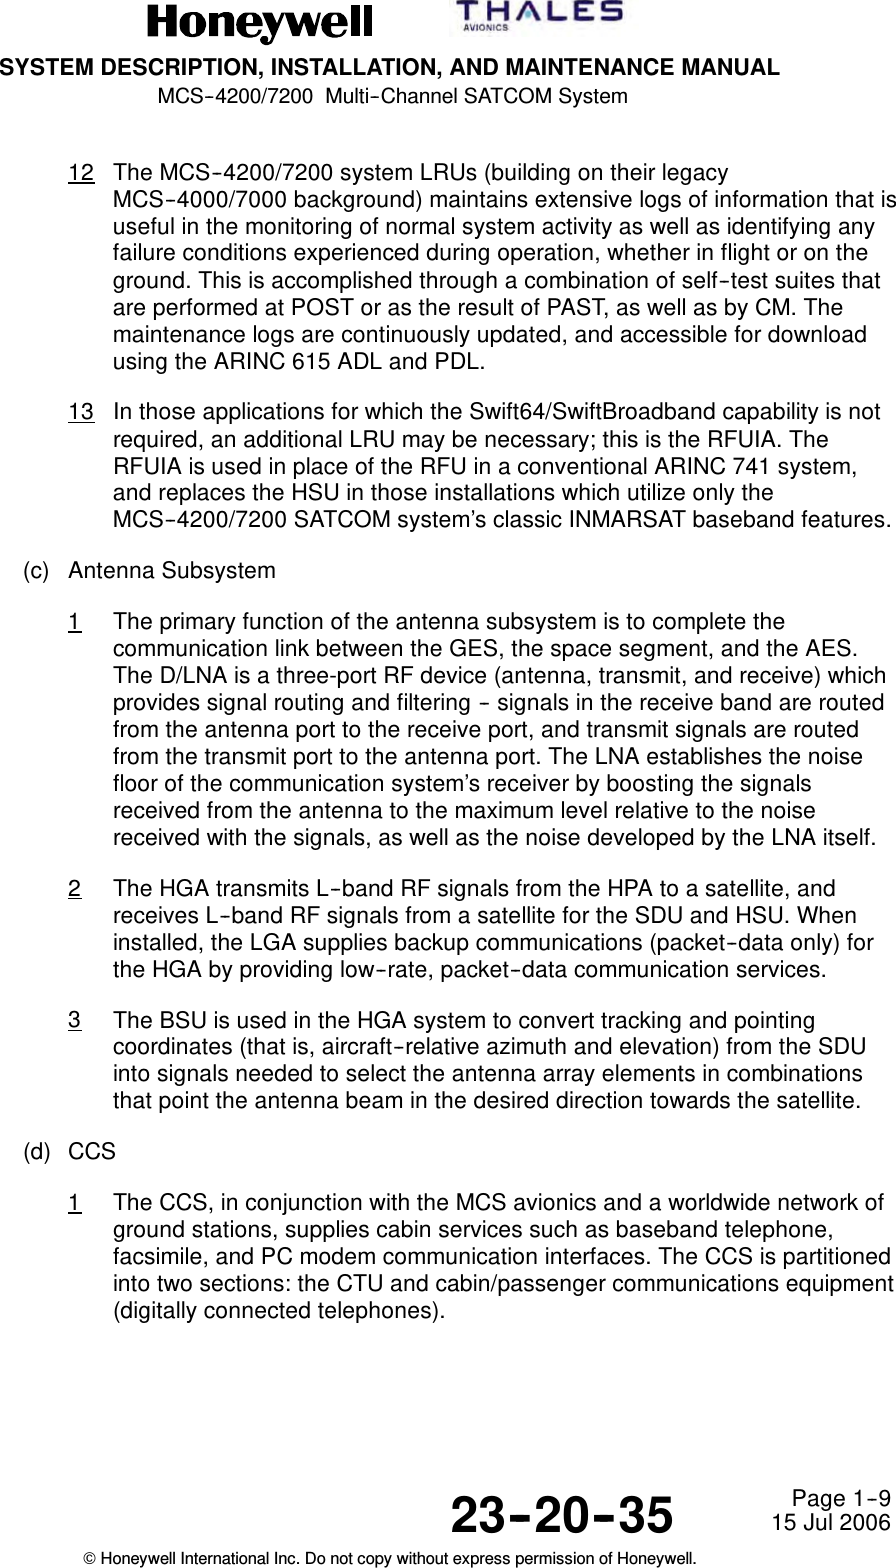 SYSTEM DESCRIPTION, INSTALLATION, AND MAINTENANCE MANUALMCS--4200/7200 Multi--Channel SATCOM System23--20--35 15 Jul 2006Honeywell International Inc. Do not copy without express permission of Honeywell.Page 1--912 The MCS--4200/7200 system LRUs (building on their legacyMCS--4000/7000 background) maintains extensive logs of information that isuseful in the monitoring of normal system activity as well as identifying anyfailure conditions experienced during operation, whether in flight or on theground. This is accomplished through a combination of self--test suites thatare performed at POST or as the result of PAST, as well as by CM. Themaintenance logs are continuously updated, and accessible for downloadusing the ARINC 615 ADL and PDL.13 In those applications for which the Swift64/SwiftBroadband capability is notrequired, an additional LRU may be necessary; this is the RFUIA. TheRFUIA is used in place of the RFU in a conventional ARINC 741 system,and replaces the HSU in those installations which utilize only theMCS--4200/7200 SATCOM system’s classic INMARSAT baseband features.(c) Antenna Subsystem1The primary function of the antenna subsystem is to complete thecommunication link between the GES, the space segment, and the AES.The D/LNA is a three-port RF device (antenna, transmit, and receive) whichprovides signal routing and filtering -- signals in the receive band are routedfrom the antenna port to the receive port, and transmit signals are routedfrom the transmit port to the antenna port. The LNA establishes the noisefloor of the communication system’s receiver by boosting the signalsreceived from the antenna to the maximum level relative to the noisereceived with the signals, as well as the noise developed by the LNA itself.2The HGA transmits L--band RF signals from the HPA to a satellite, andreceives L--band RF signals from a satellite for the SDU and HSU. Wheninstalled, the LGA supplies backup communications (packet--data only) forthe HGA by providing low--rate, packet--data communication services.3The BSU is used in the HGA system to convert tracking and pointingcoordinates (that is, aircraft--relative azimuth and elevation) from the SDUinto signals needed to select the antenna array elements in combinationsthat point the antenna beam in the desired direction towards the satellite.(d) CCS1The CCS, in conjunction with the MCS avionics and a worldwide network ofground stations, supplies cabin services such as baseband telephone,facsimile, and PC modem communication interfaces. The CCS is partitionedinto two sections: the CTU and cabin/passenger communications equipment(digitally connected telephones).